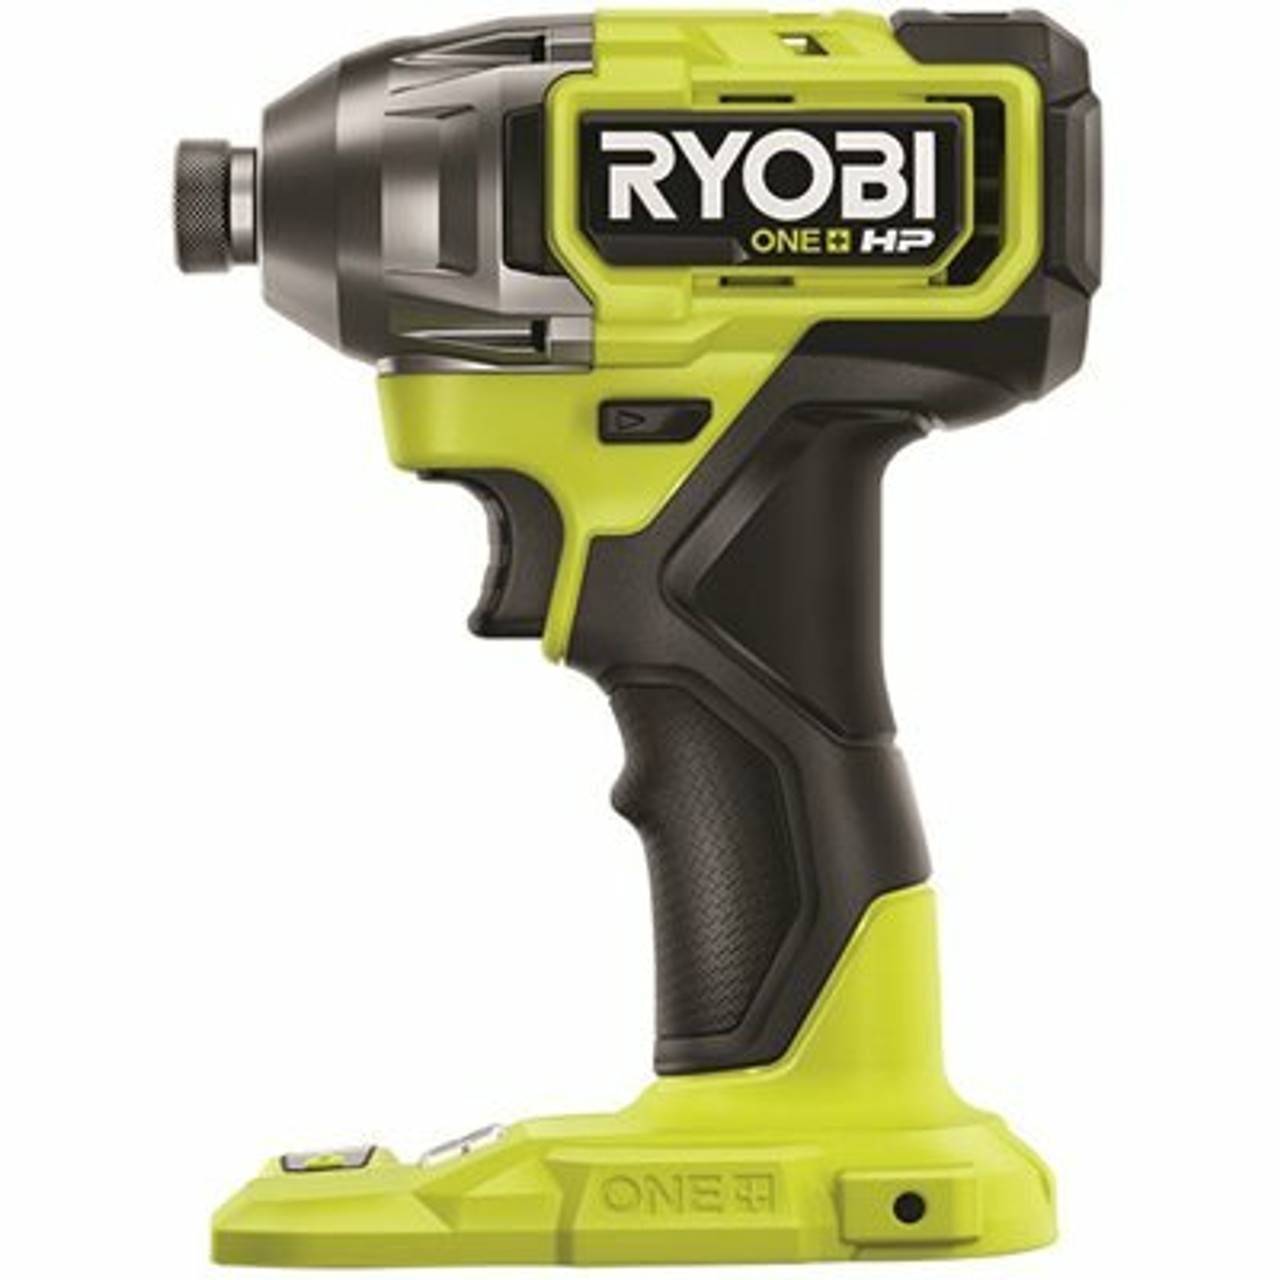 Ryobi One+ Hp 18V Brushless Cordless 1/4 In. 4-Mode Impact Driver (Tool Only)